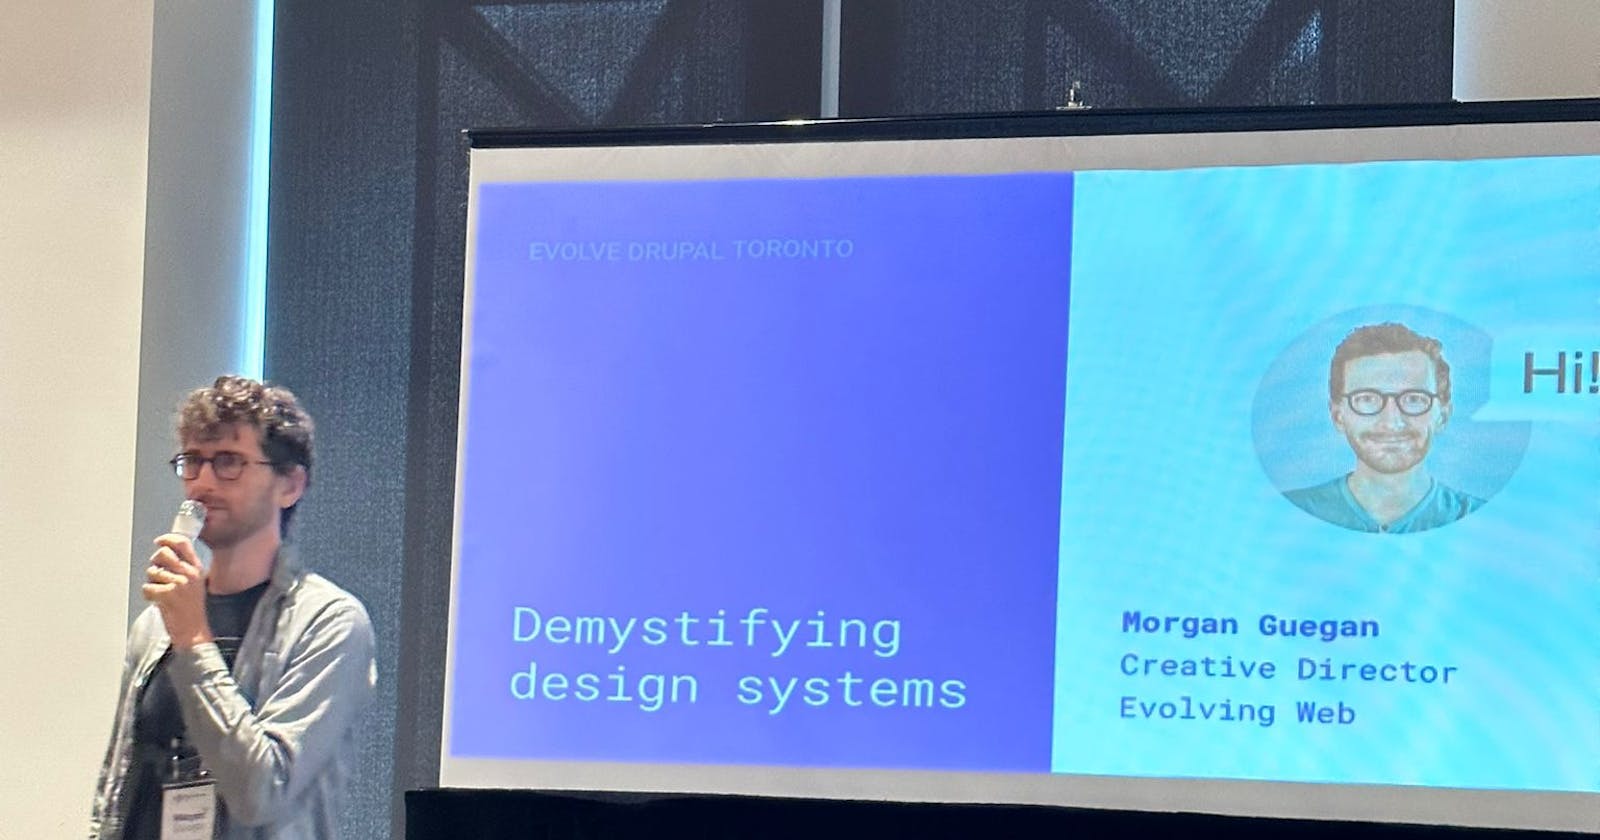 Day 2/100 in #100DaysOfDesign: Demystifying Design Systems at EvolveUX Conference By Morgan Guegan